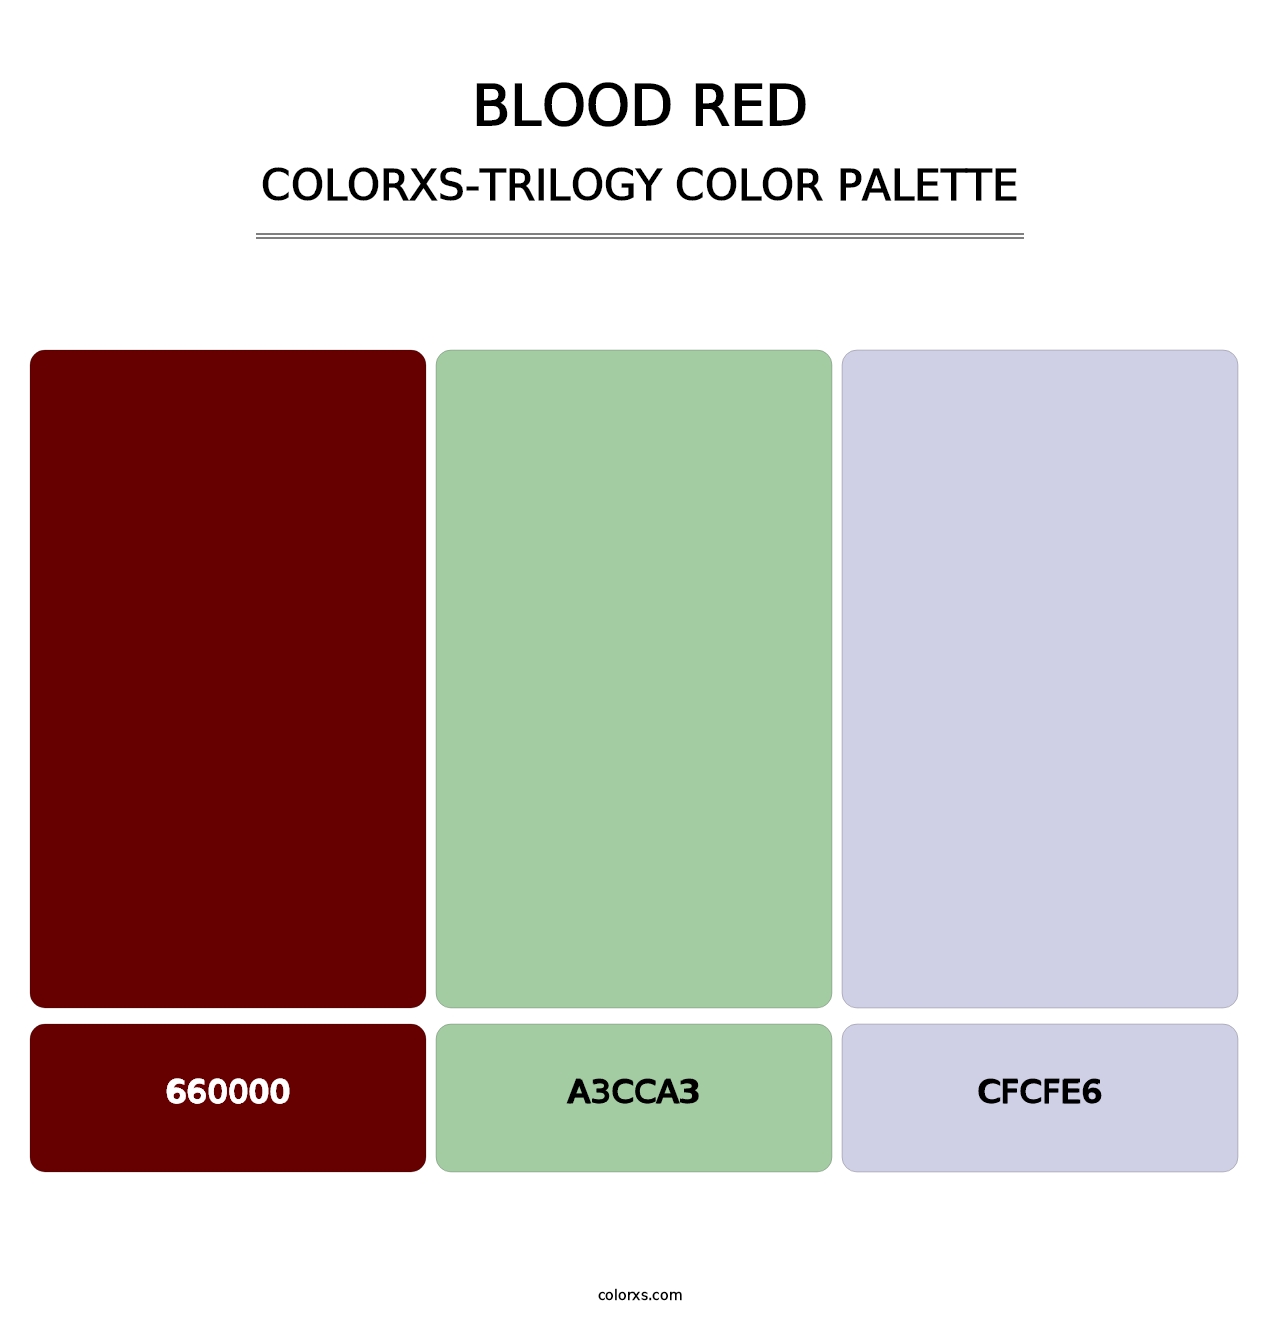 Blood Red - Colorxs Trilogy Palette